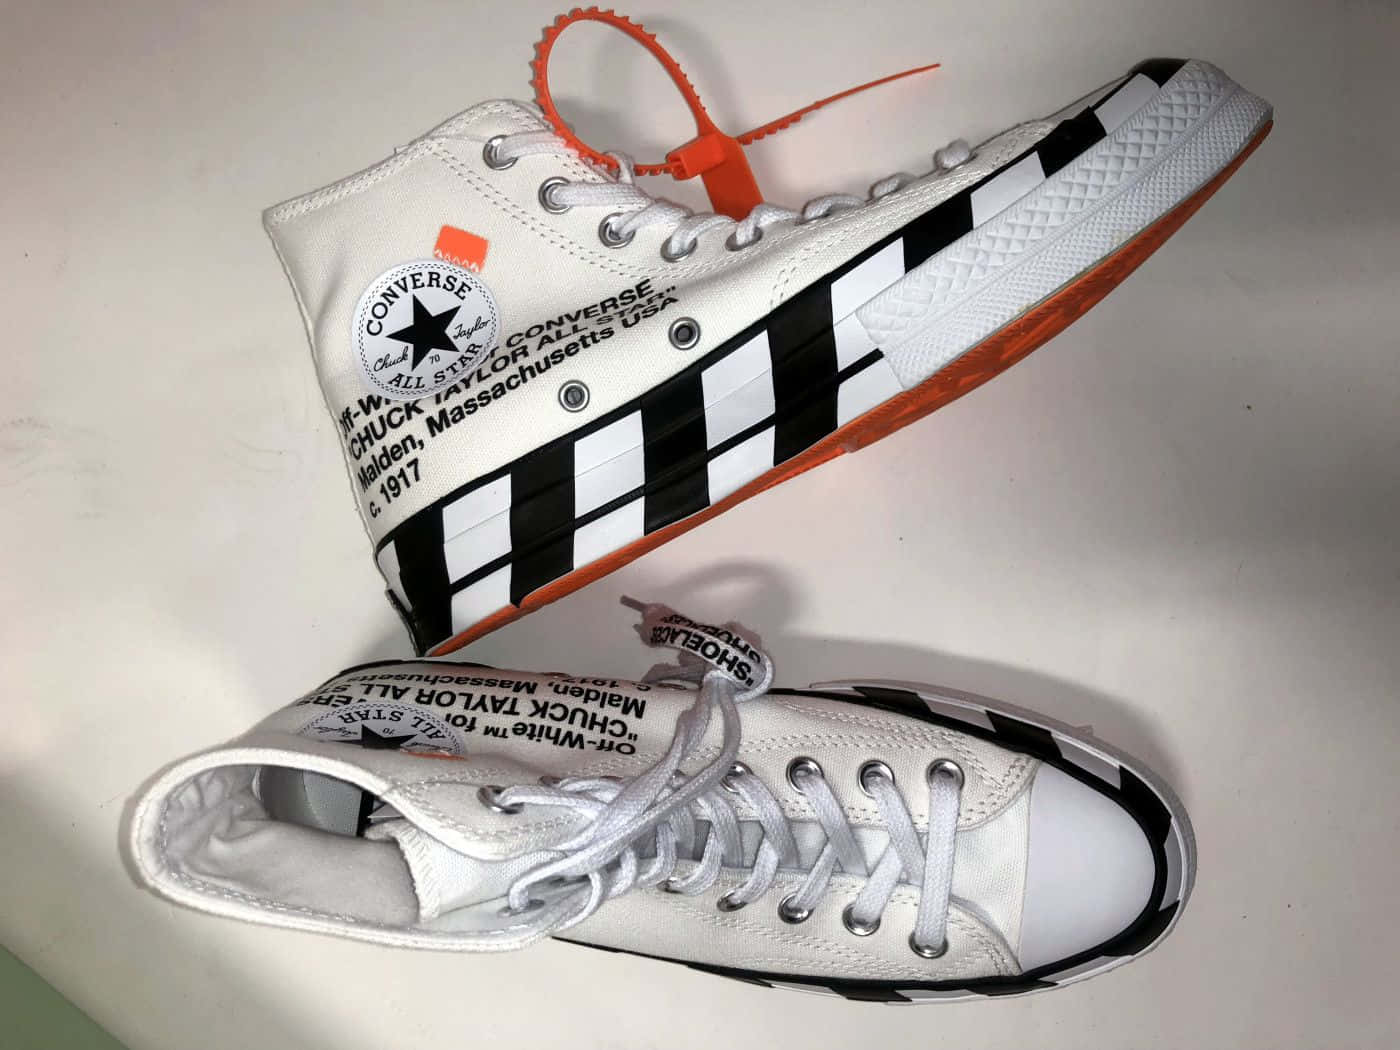 A Pair Of White Converse Sneakers With Orange And Black Stripes Wallpaper